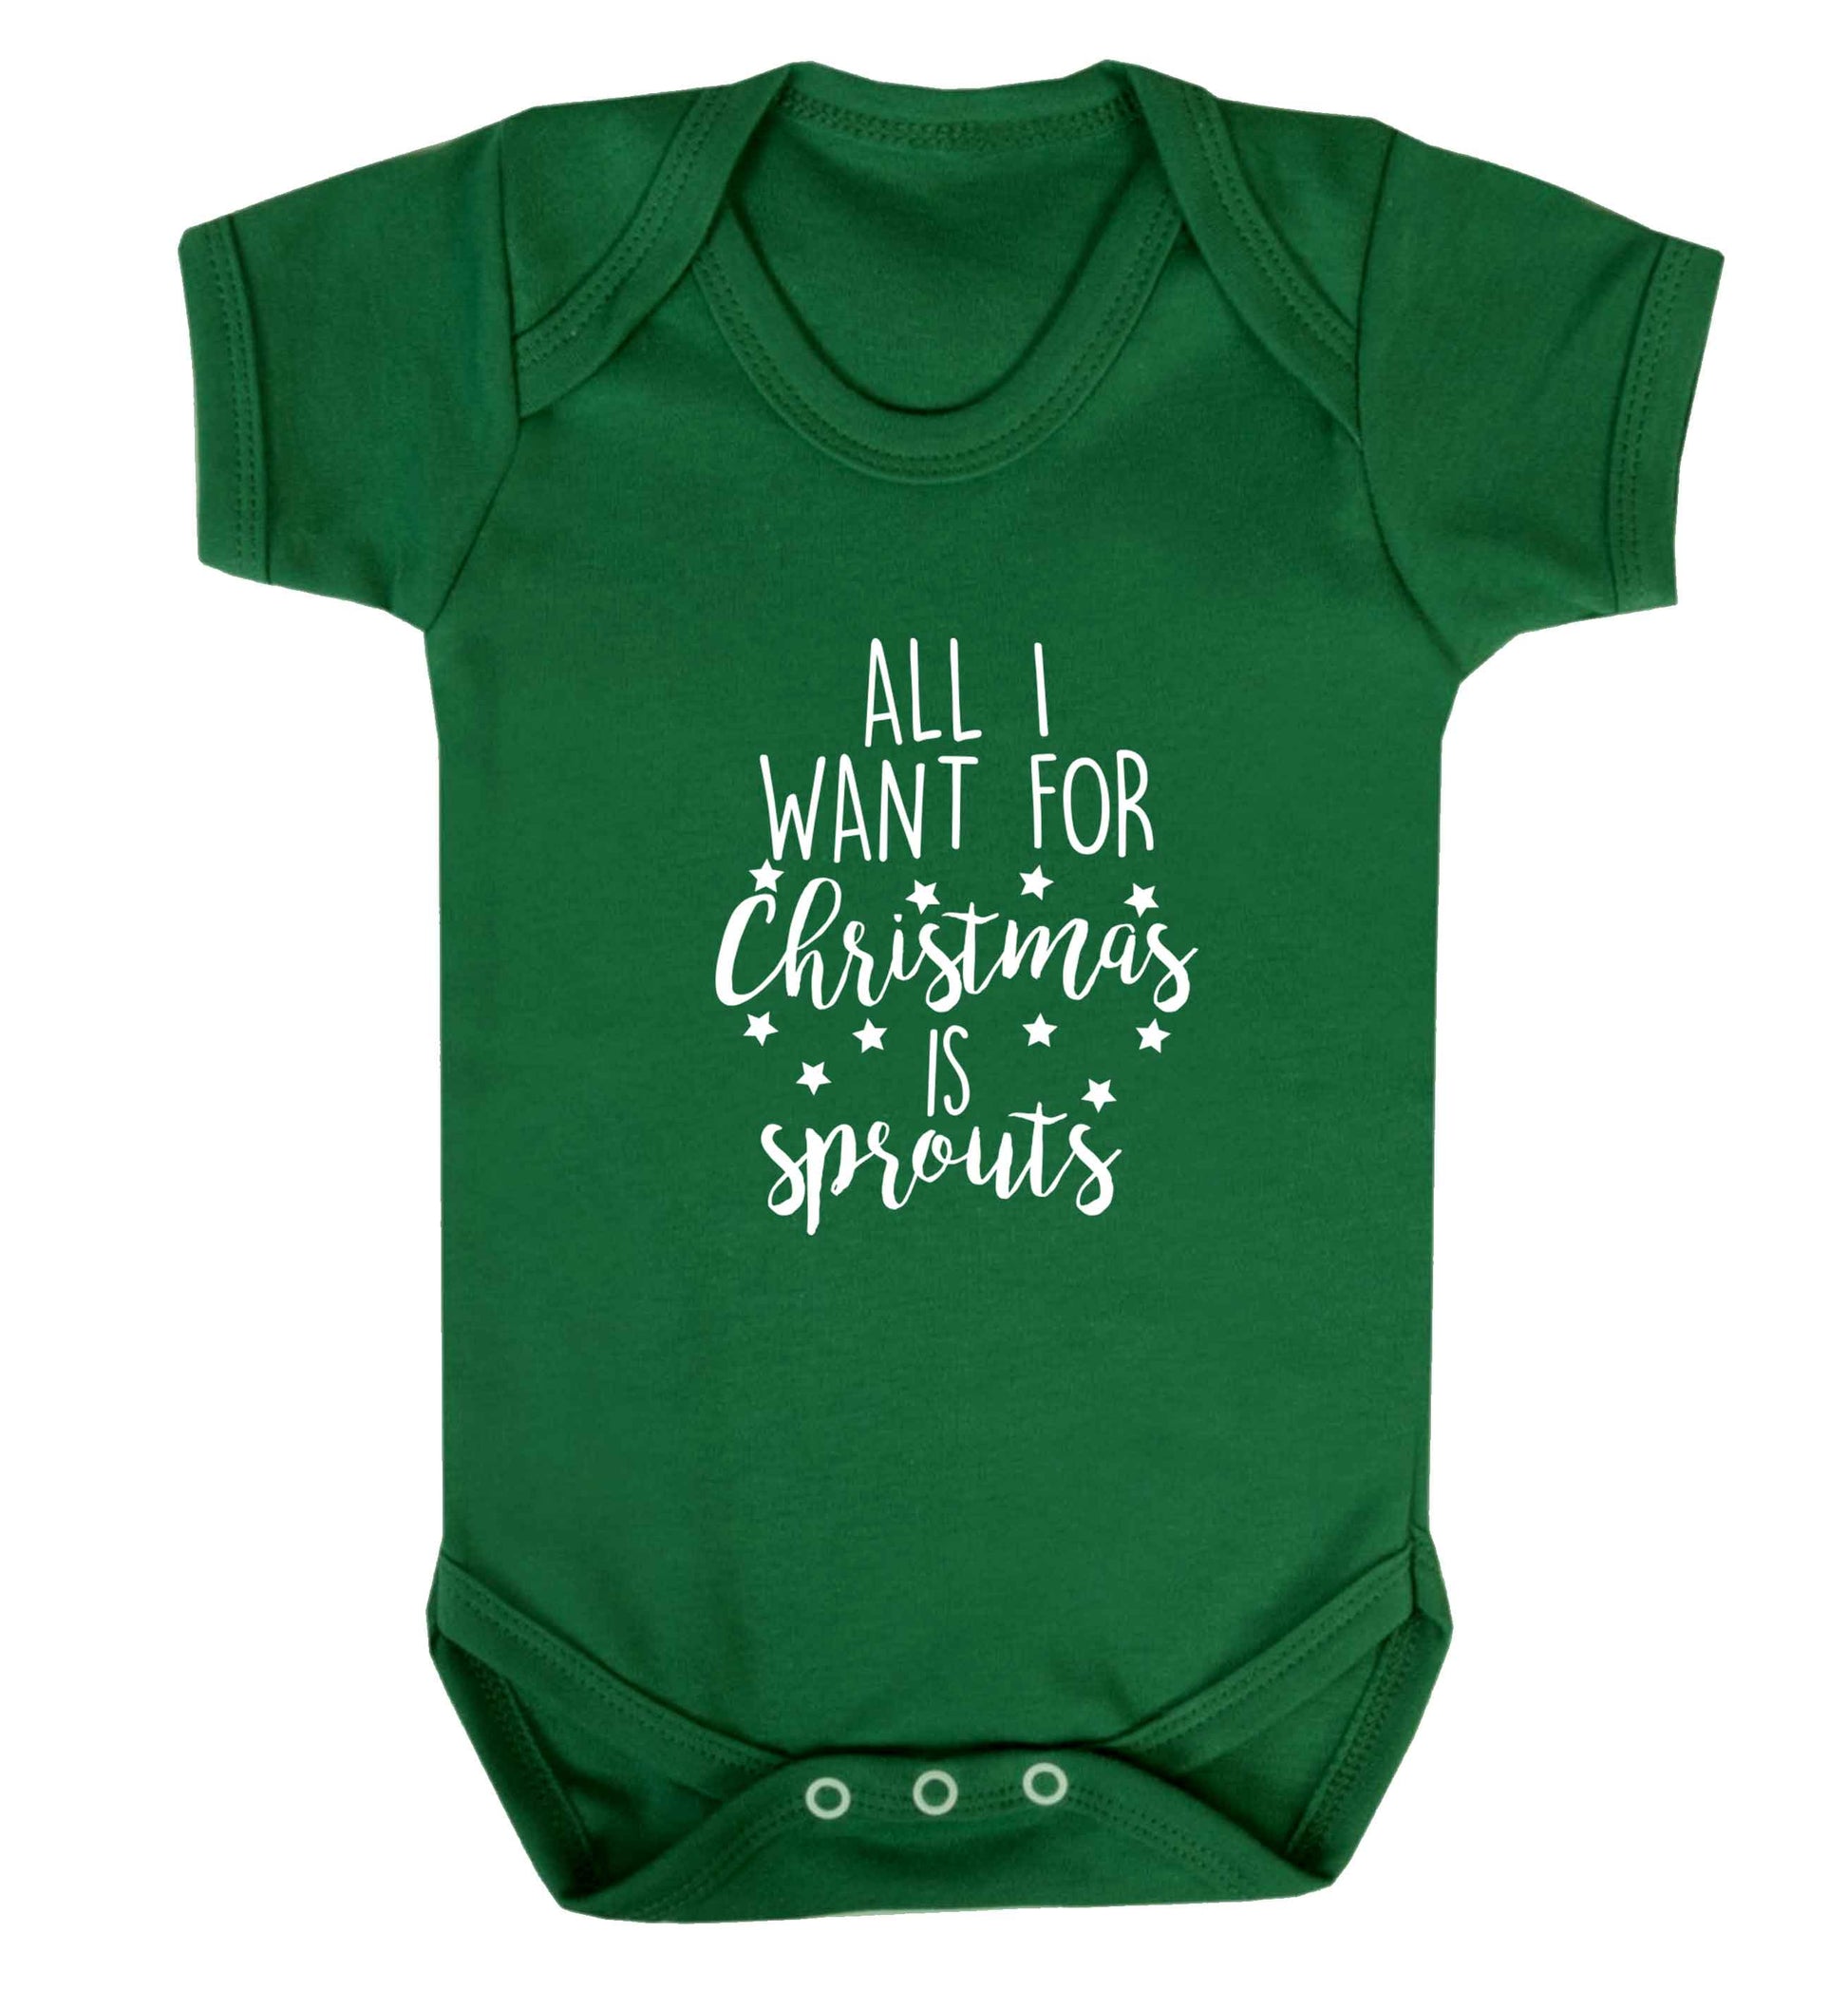 All I want for Christmas is sprouts baby vest green 18-24 months